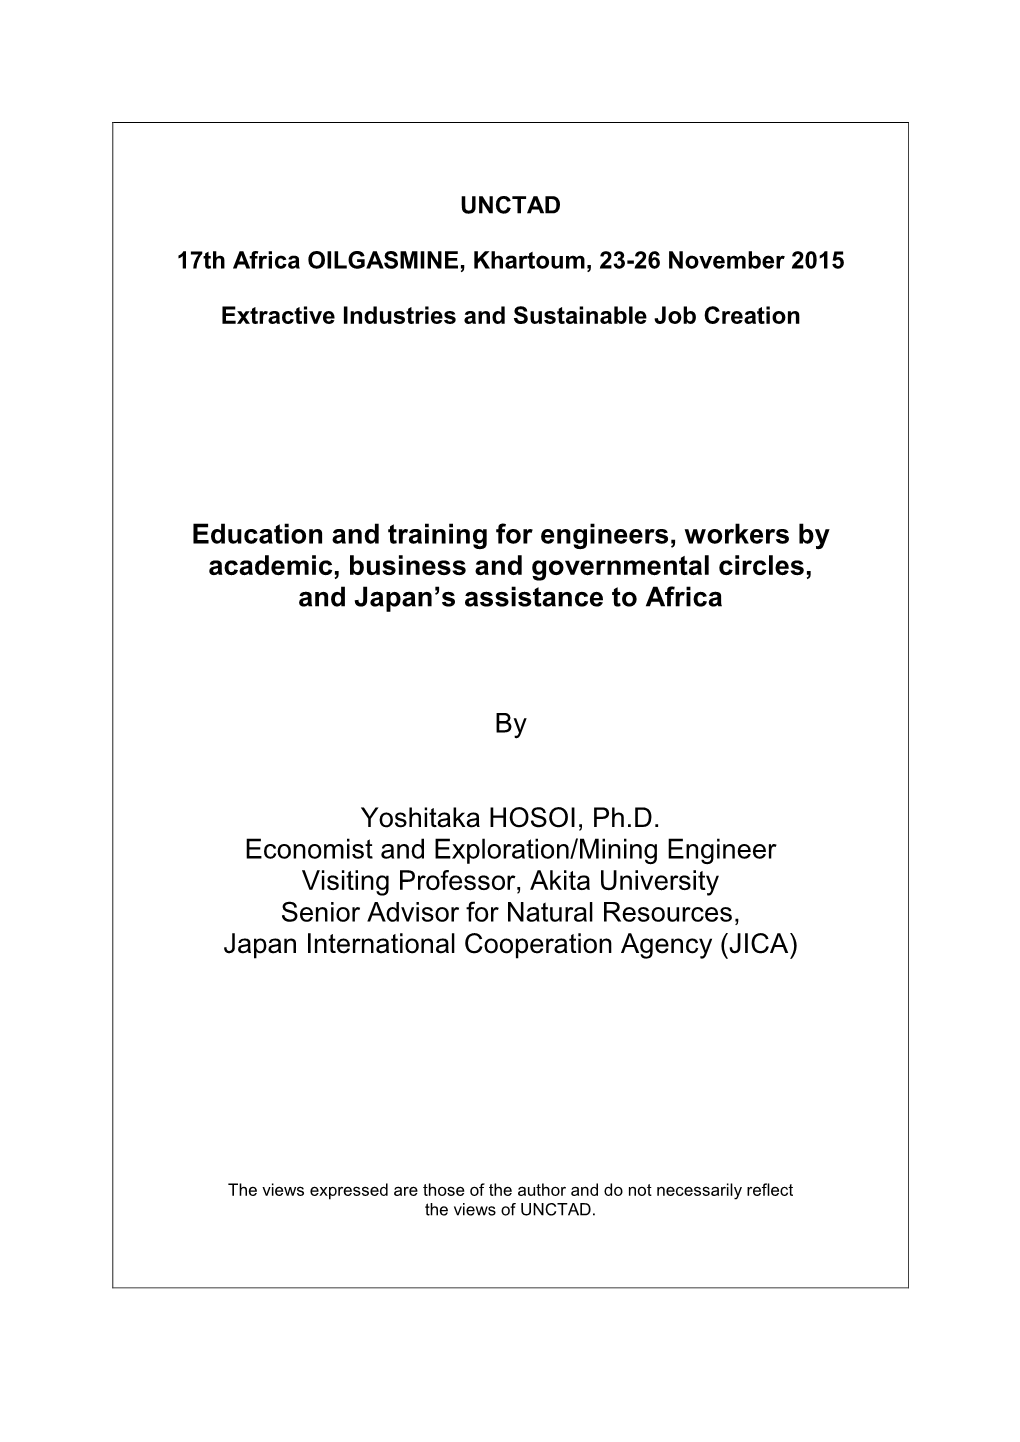 Education and Training for Engineers, Workers by Academic, Business and Governmental Circles, and Japan’S Assistance to Africa